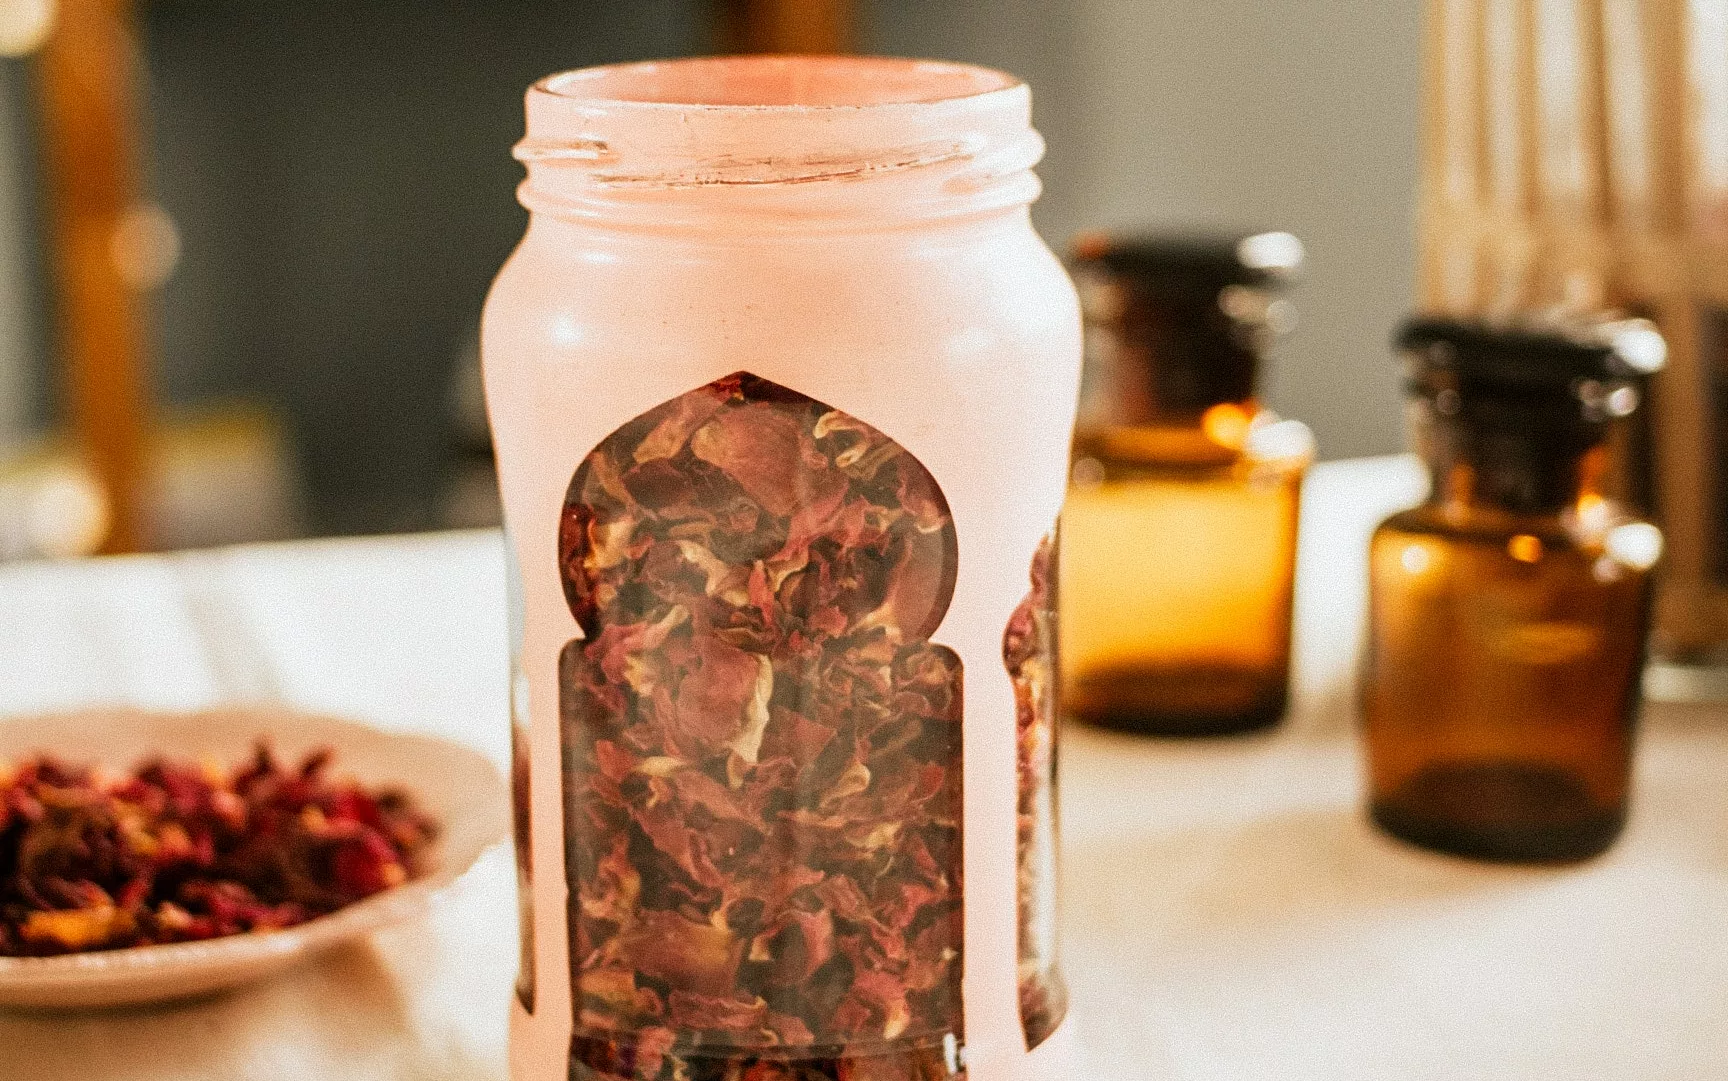 Guide: How to Dry Rose Petals at Home